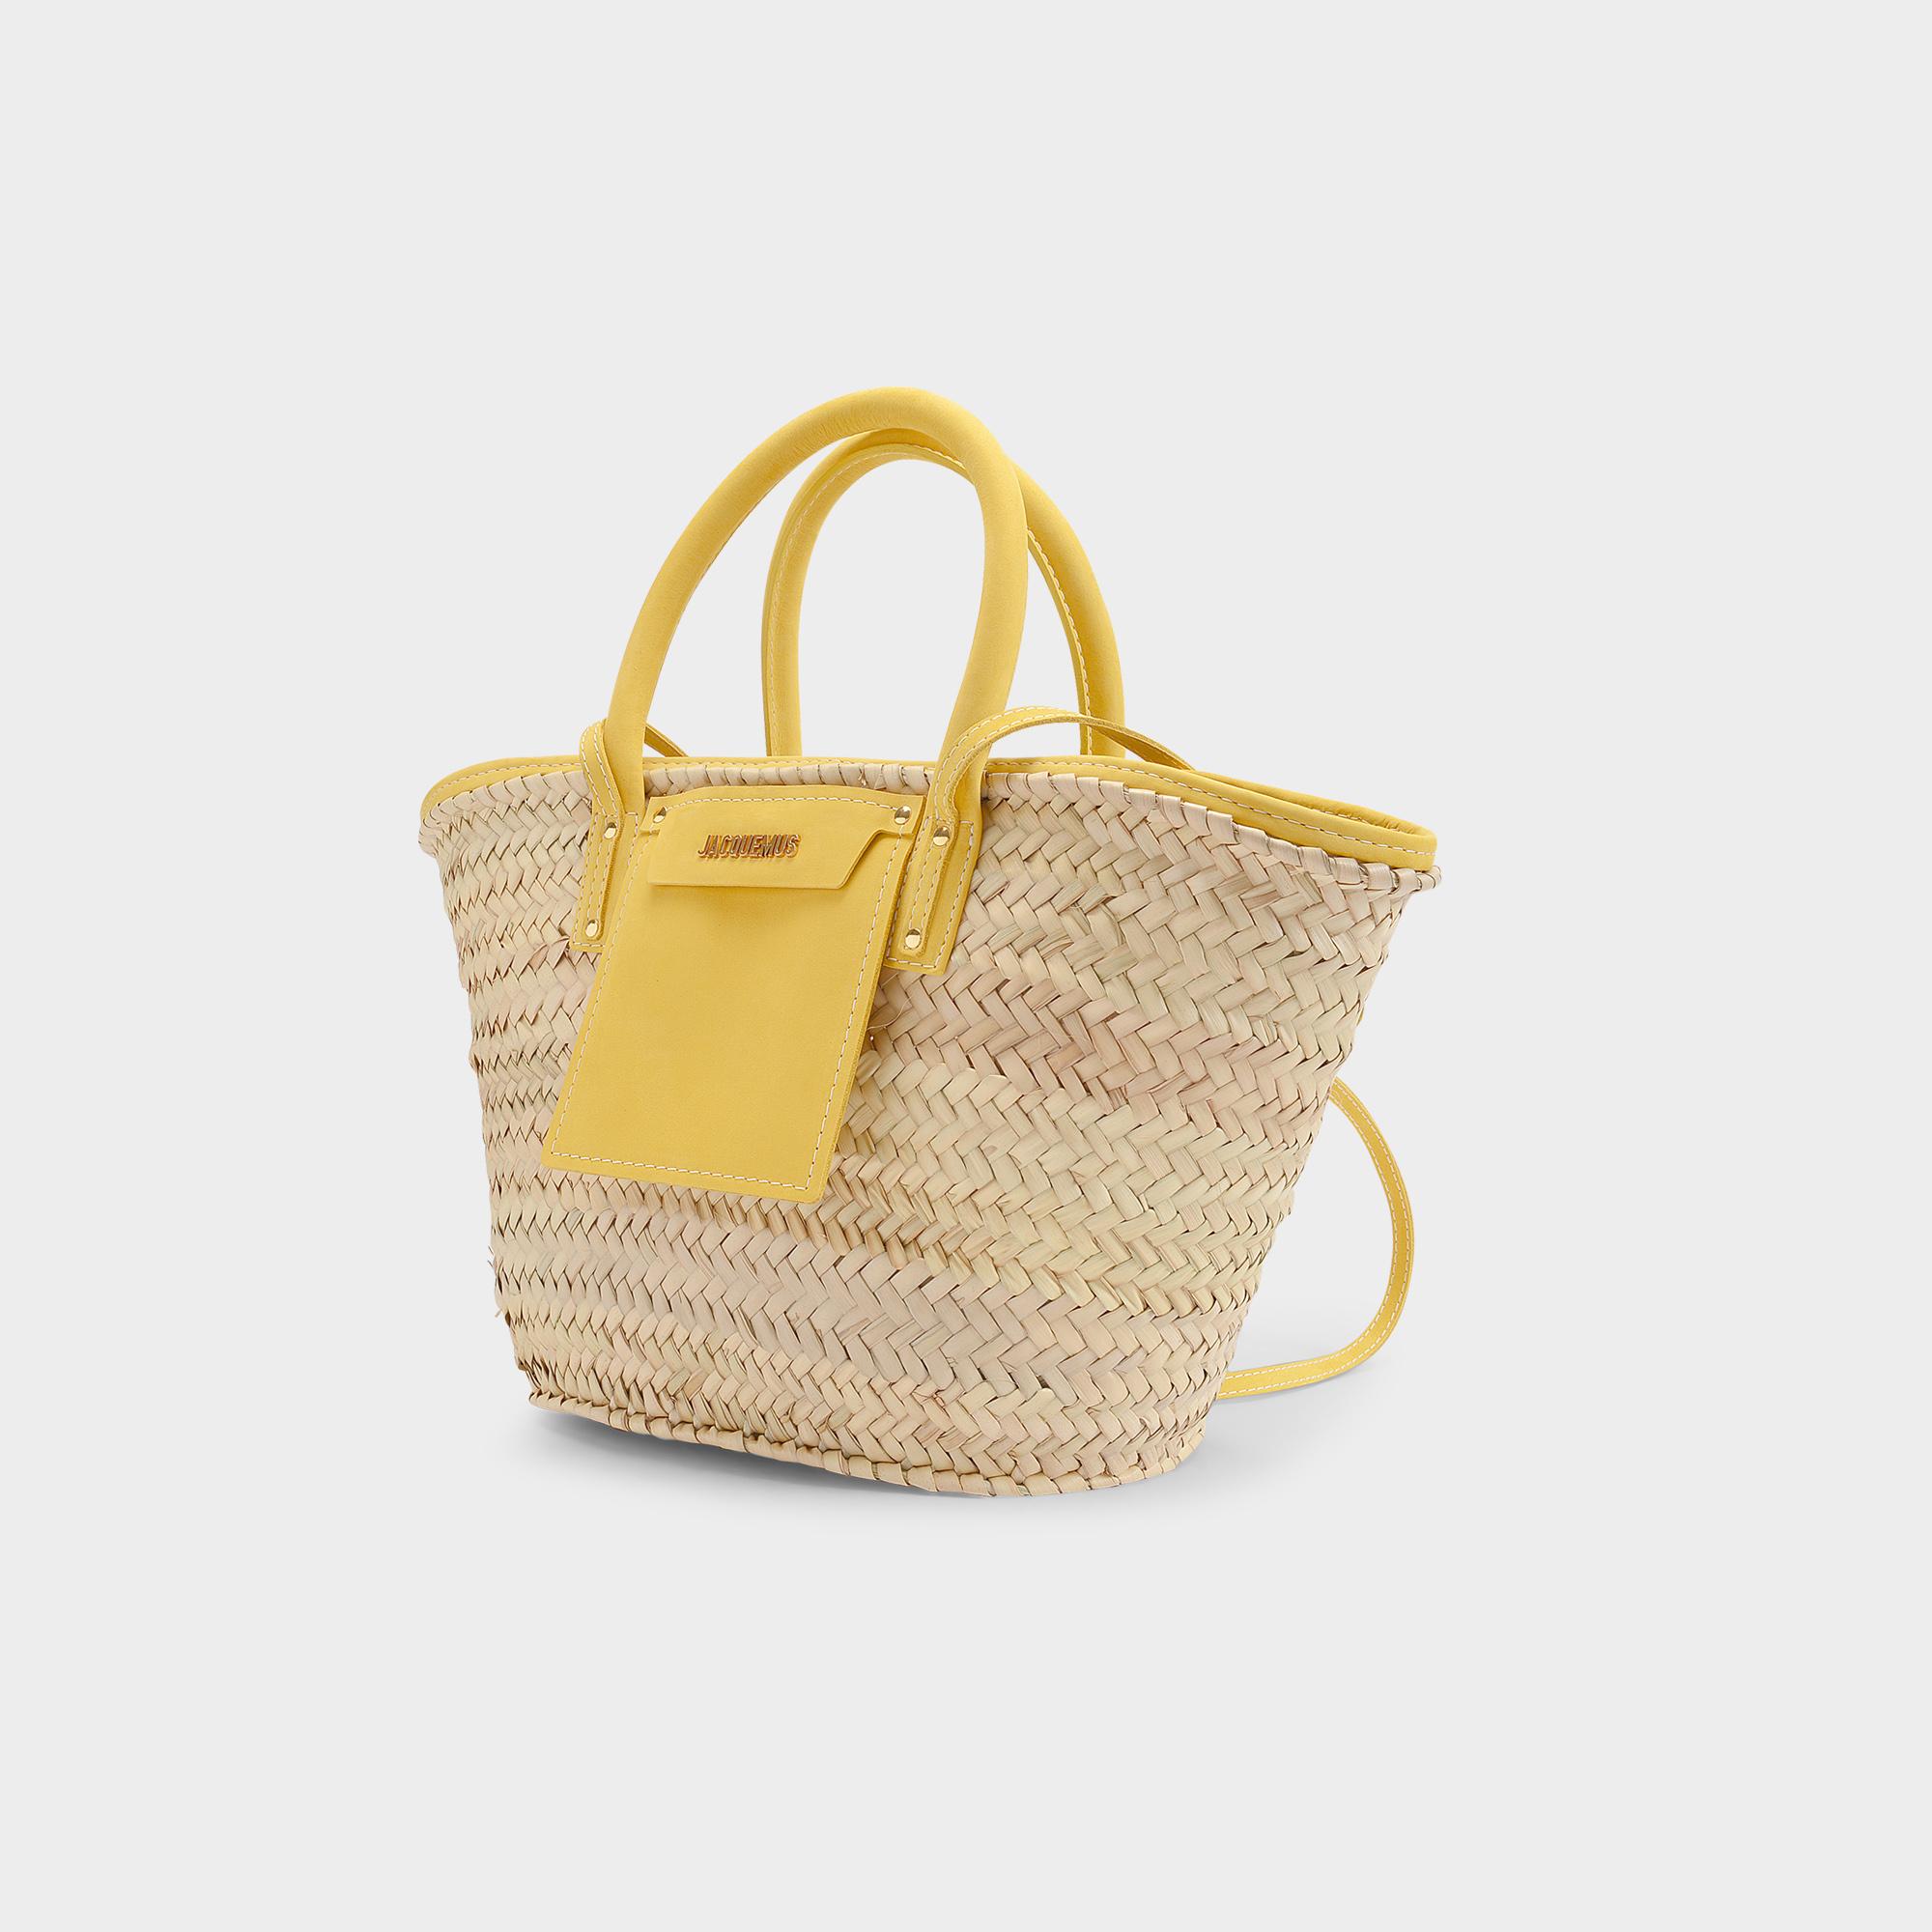 Jacquemus Le Grand Panier Soleil Woven Straw Tote Bag in Yellow | Lyst